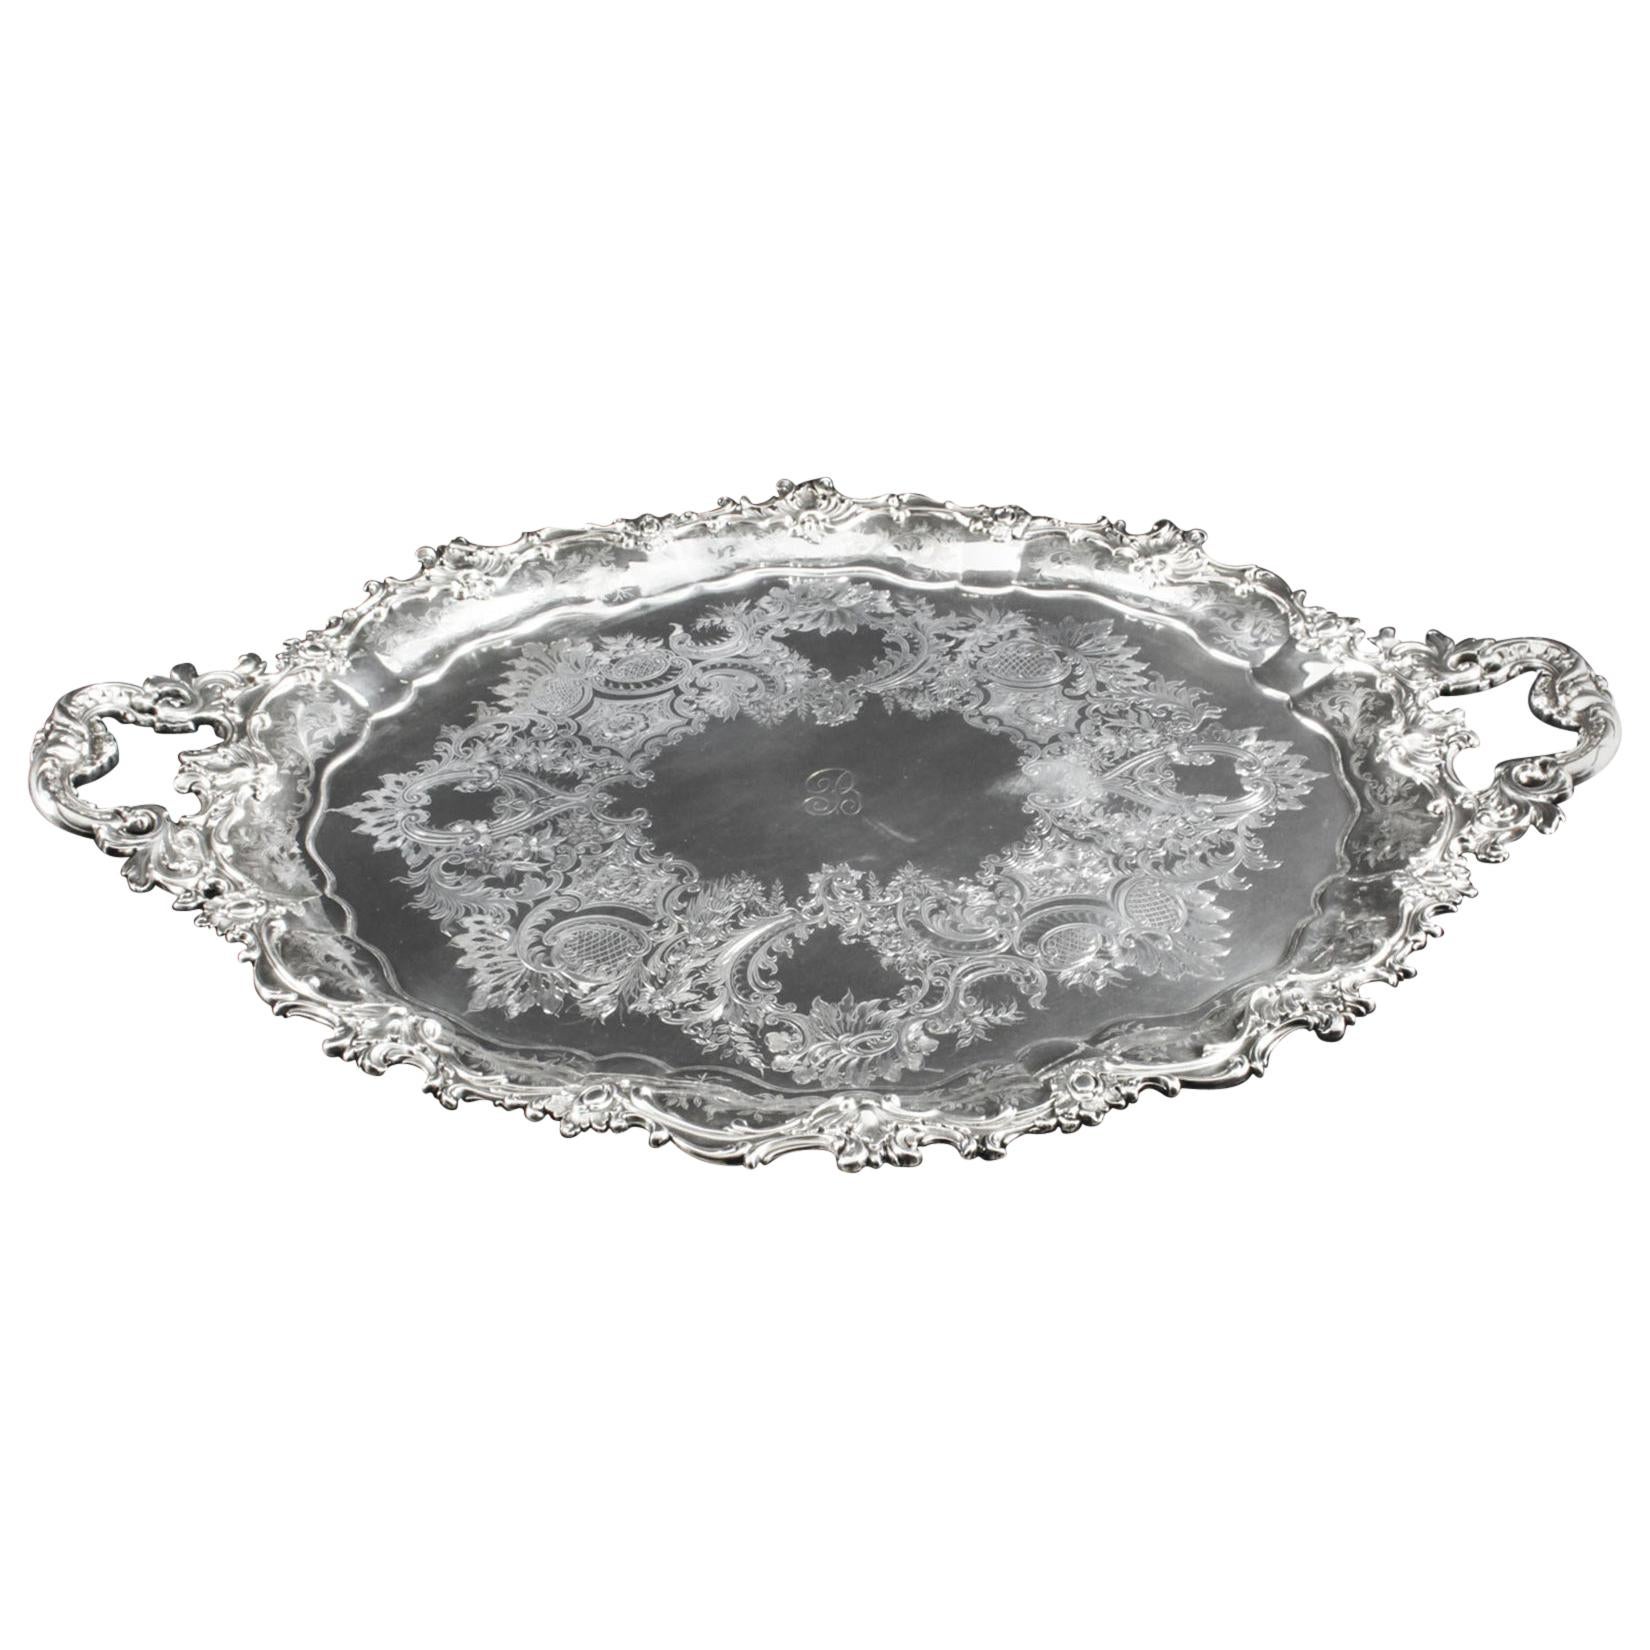 Antique Victorian Oval Silver Plated Tray by Manoah Rhodes, 19th Century